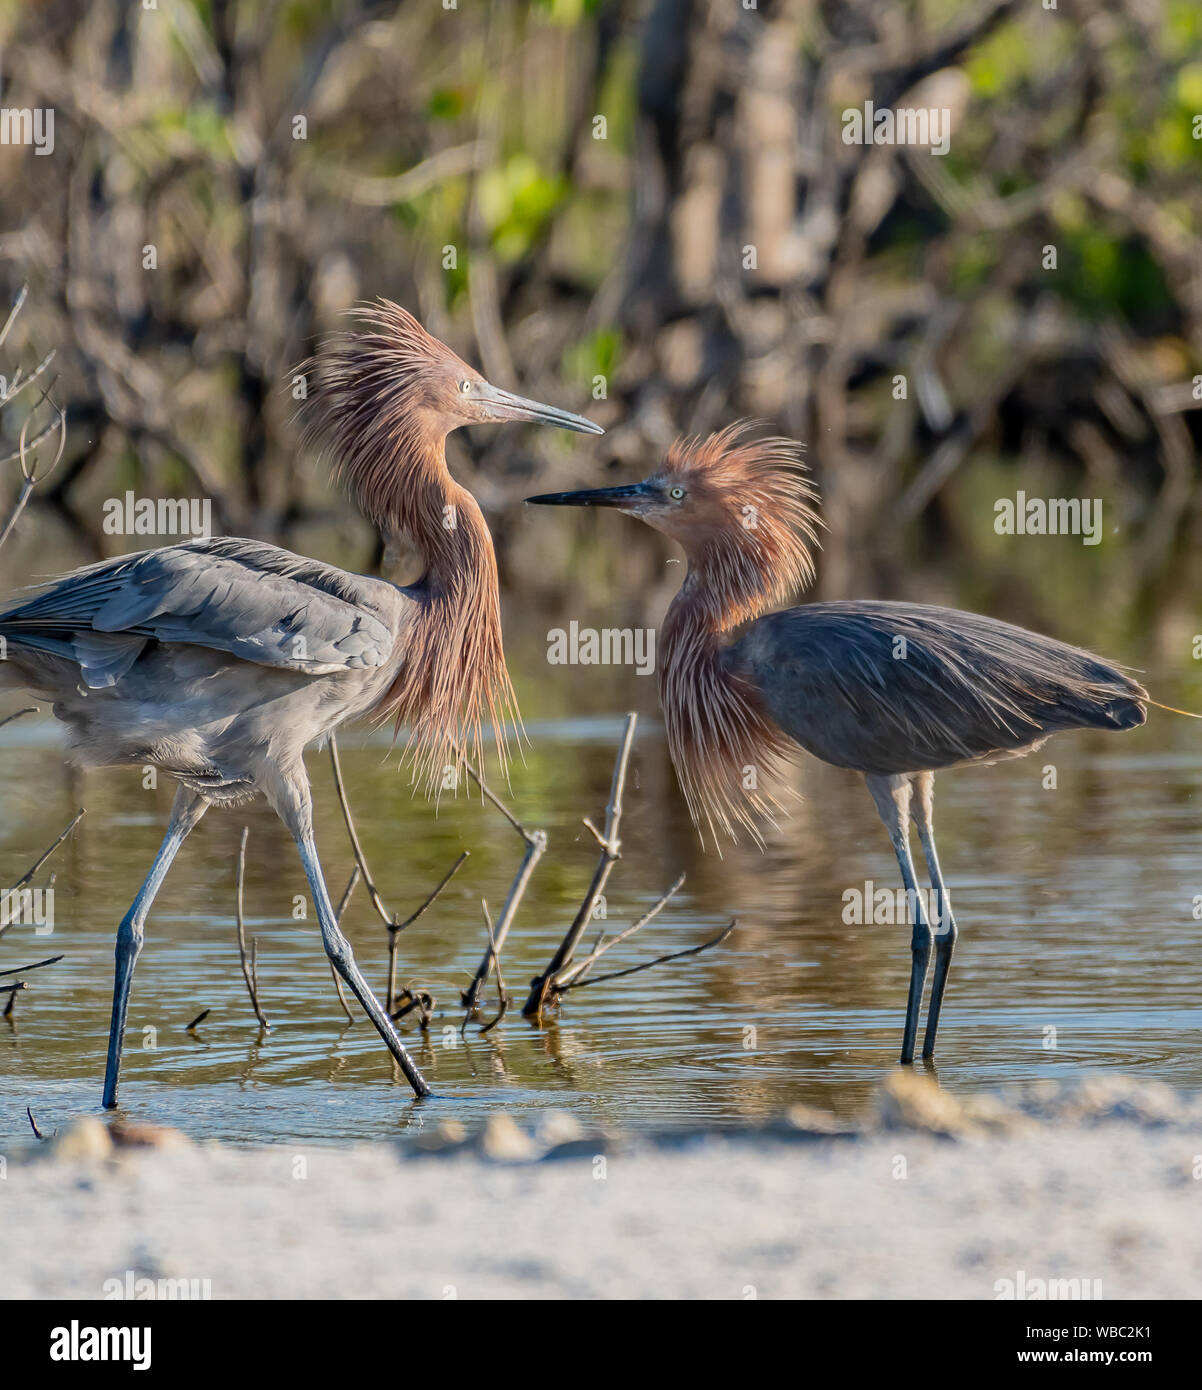 Two reddish egrets fluff their feathers as they meet Stock Photo